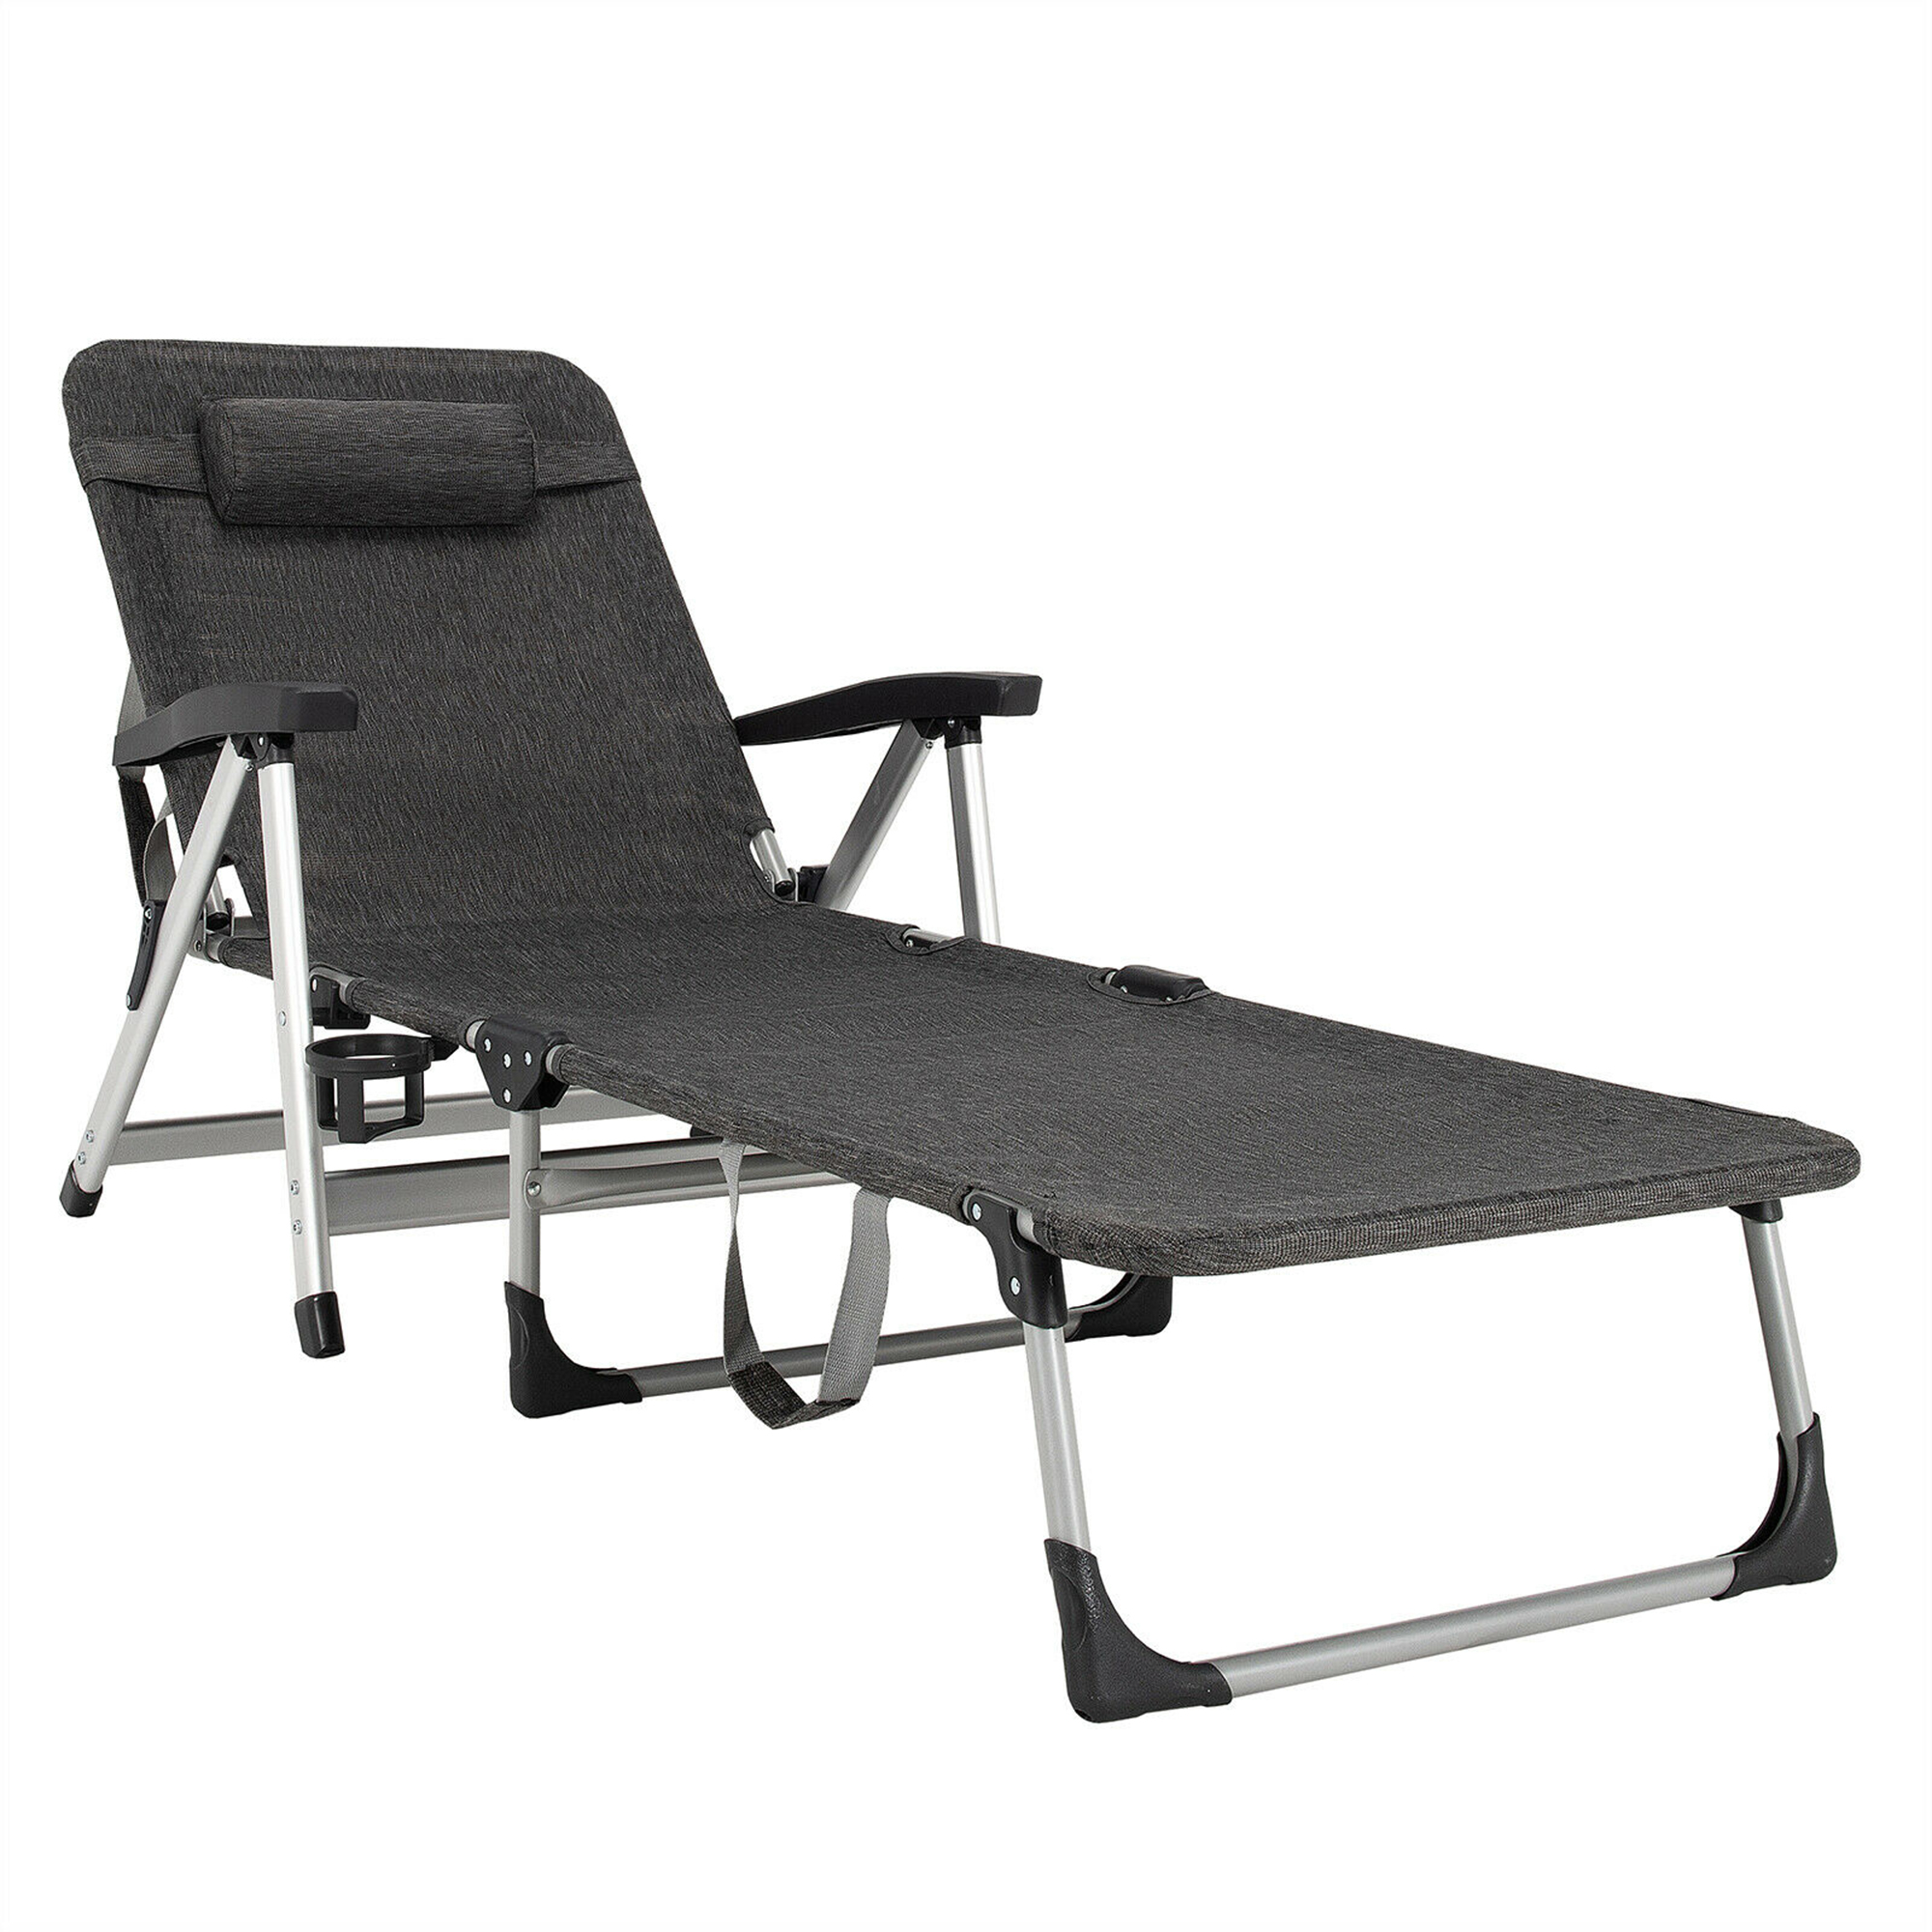 Gymax Beach Chaise Lounge Chair Patio Folding Recliner w/ 7 Adjustable Positions Grey - image 1 of 10